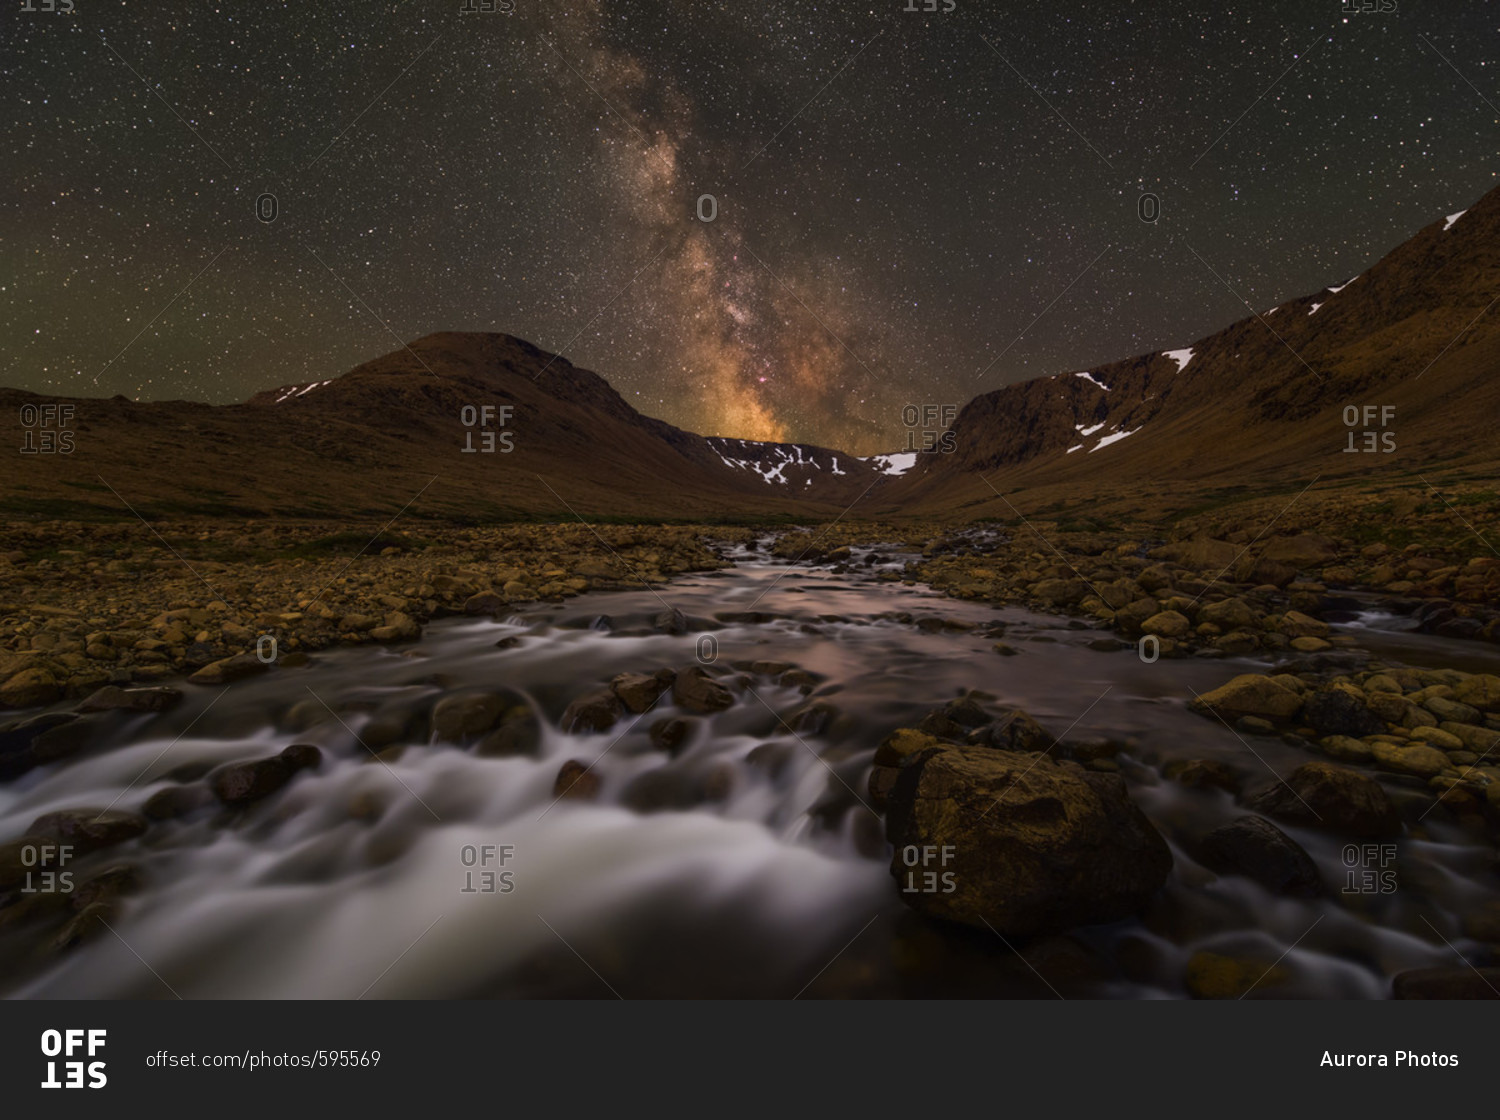 The Milky Way over cascades in a seasonal river in The Tablelands of Gros Morne National Park in Newfoundland.